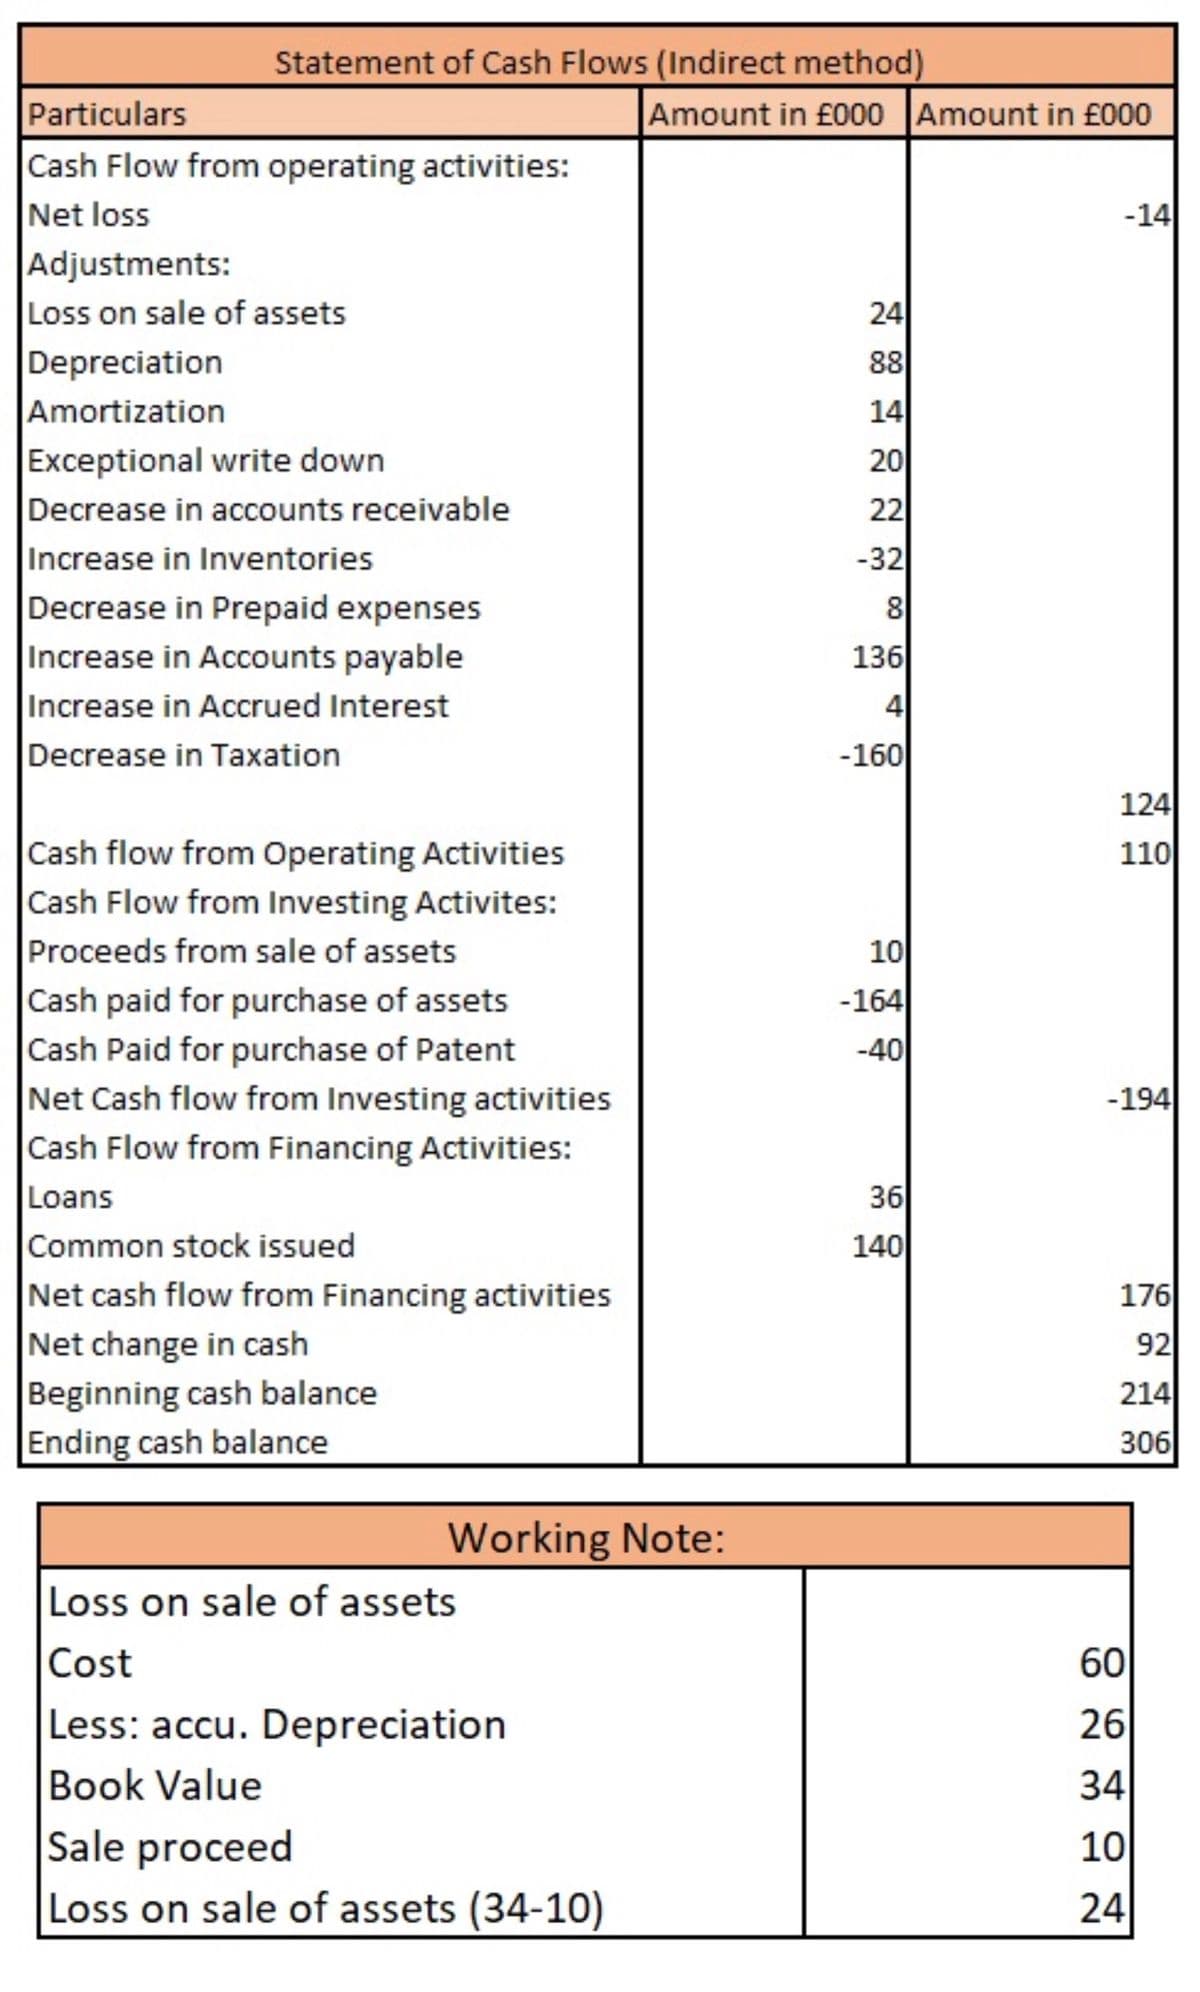 Statement of Cash Flows (Indirect method)
Particulars
Amount in £000 Amount in £000
Cash Flow from operating activities:
Net loss
Adjustments:
Loss on sale of assets
Depreciation
Amortization
Exceptional write down
Decrease in accounts receivable
Increase in Inventories
Decrease in Prepaid expenses
Increase in Accounts payable
Increase in Accrued Interest
Decrease in Taxation
-14
24
88
14
20
22
-32
8
136
4
-160
124
Cash flow from Operating Activities
Cash Flow from Investing Activites:
Proceeds from sale of assets
Cash paid for purchase of assets
Cash Paid for purchase of Patent
Net Cash flow from Investing activities
Cash Flow from Financing Activities:
110
10
-164
-40
-194
Loans
36
Common stock issued
Net cash flow from Financing activities
Net change in cash
Beginning cash balance
Ending cash balance
140
176
92
214
306
Working Note:
Loss on sale of assets
Cost
60
Less: accu. Depreciation
26
Book Value
34
Sale proceed
10
Loss on sale of assets (34-10)
24
